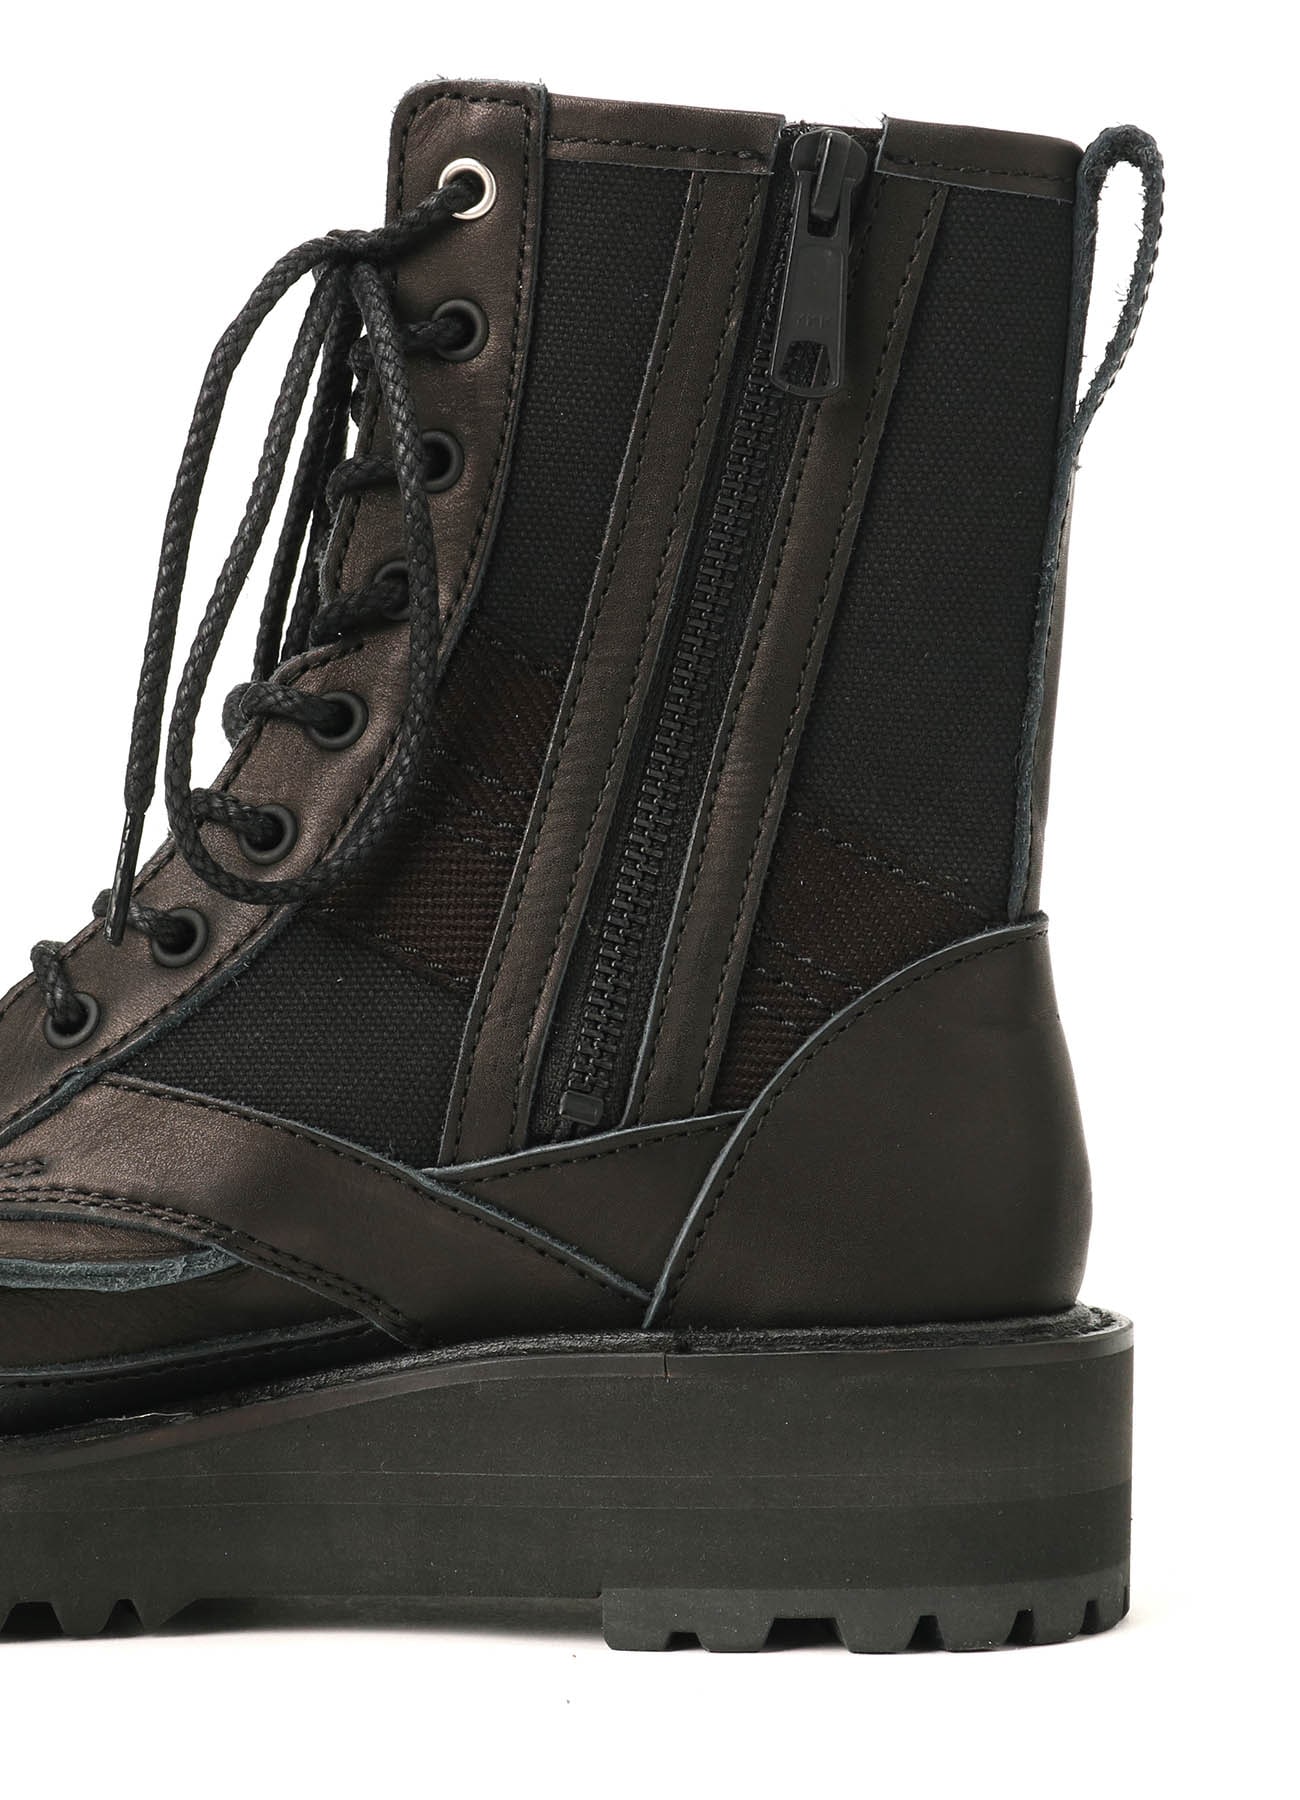 COTTON DUCK/LEATHER COMBINATION MILITARY BOOTS